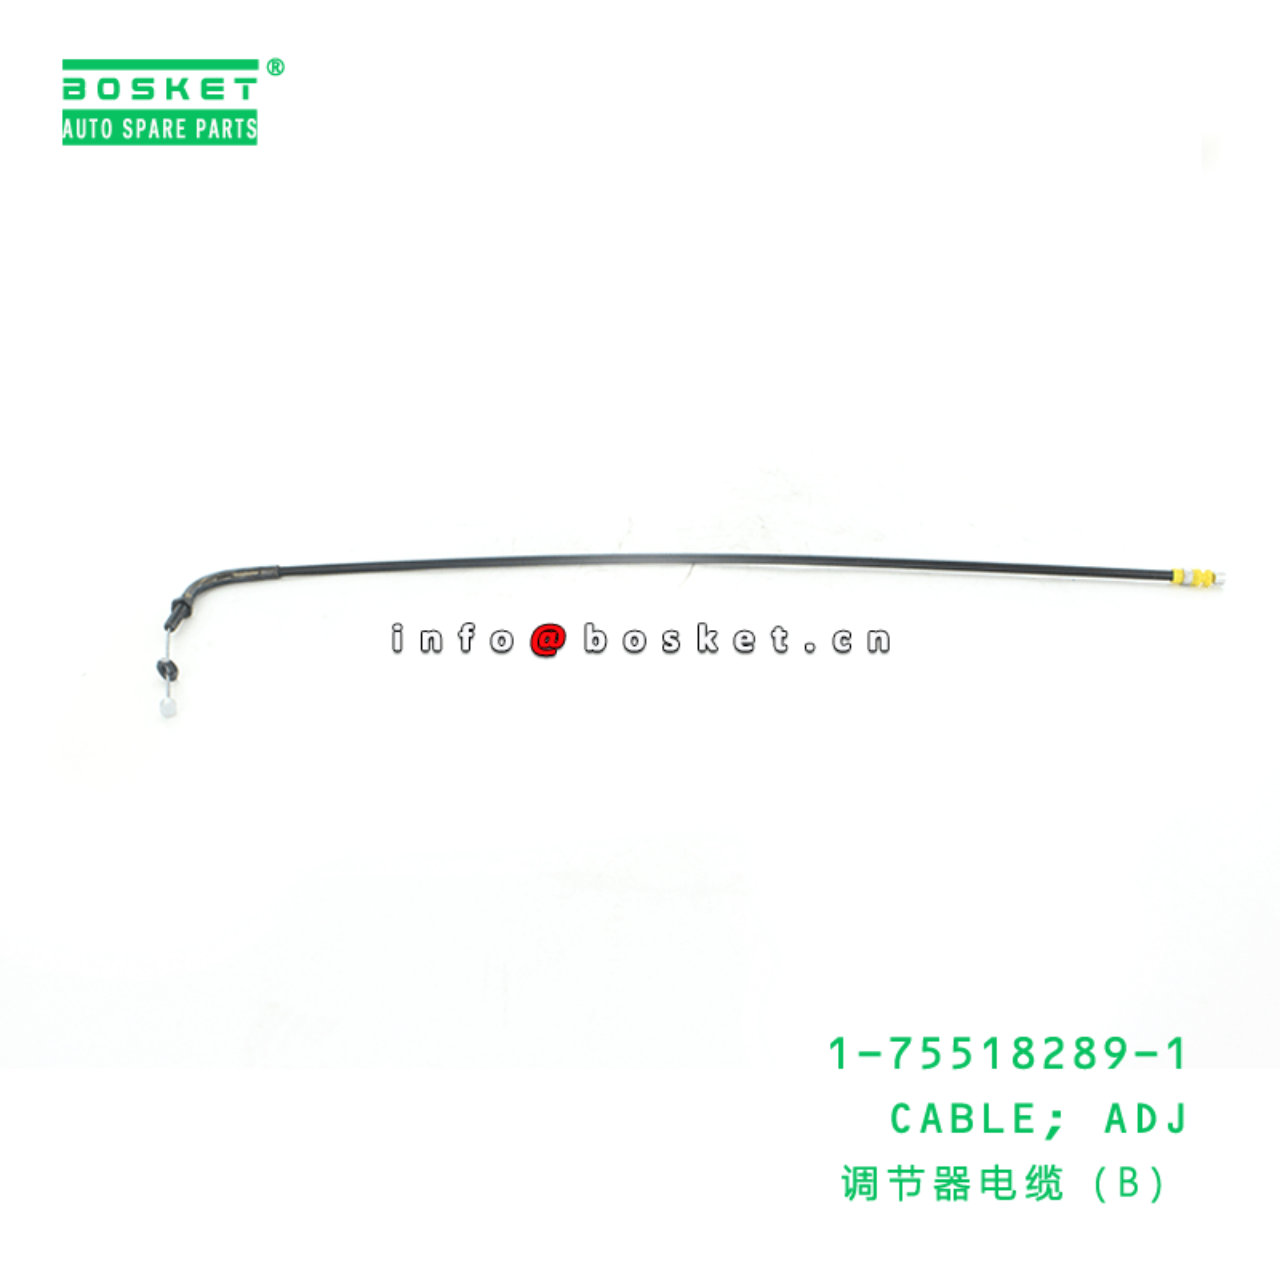 1-75518289-1 Adjuster Cable 1755182891 Suitable for ISUZU VC46 